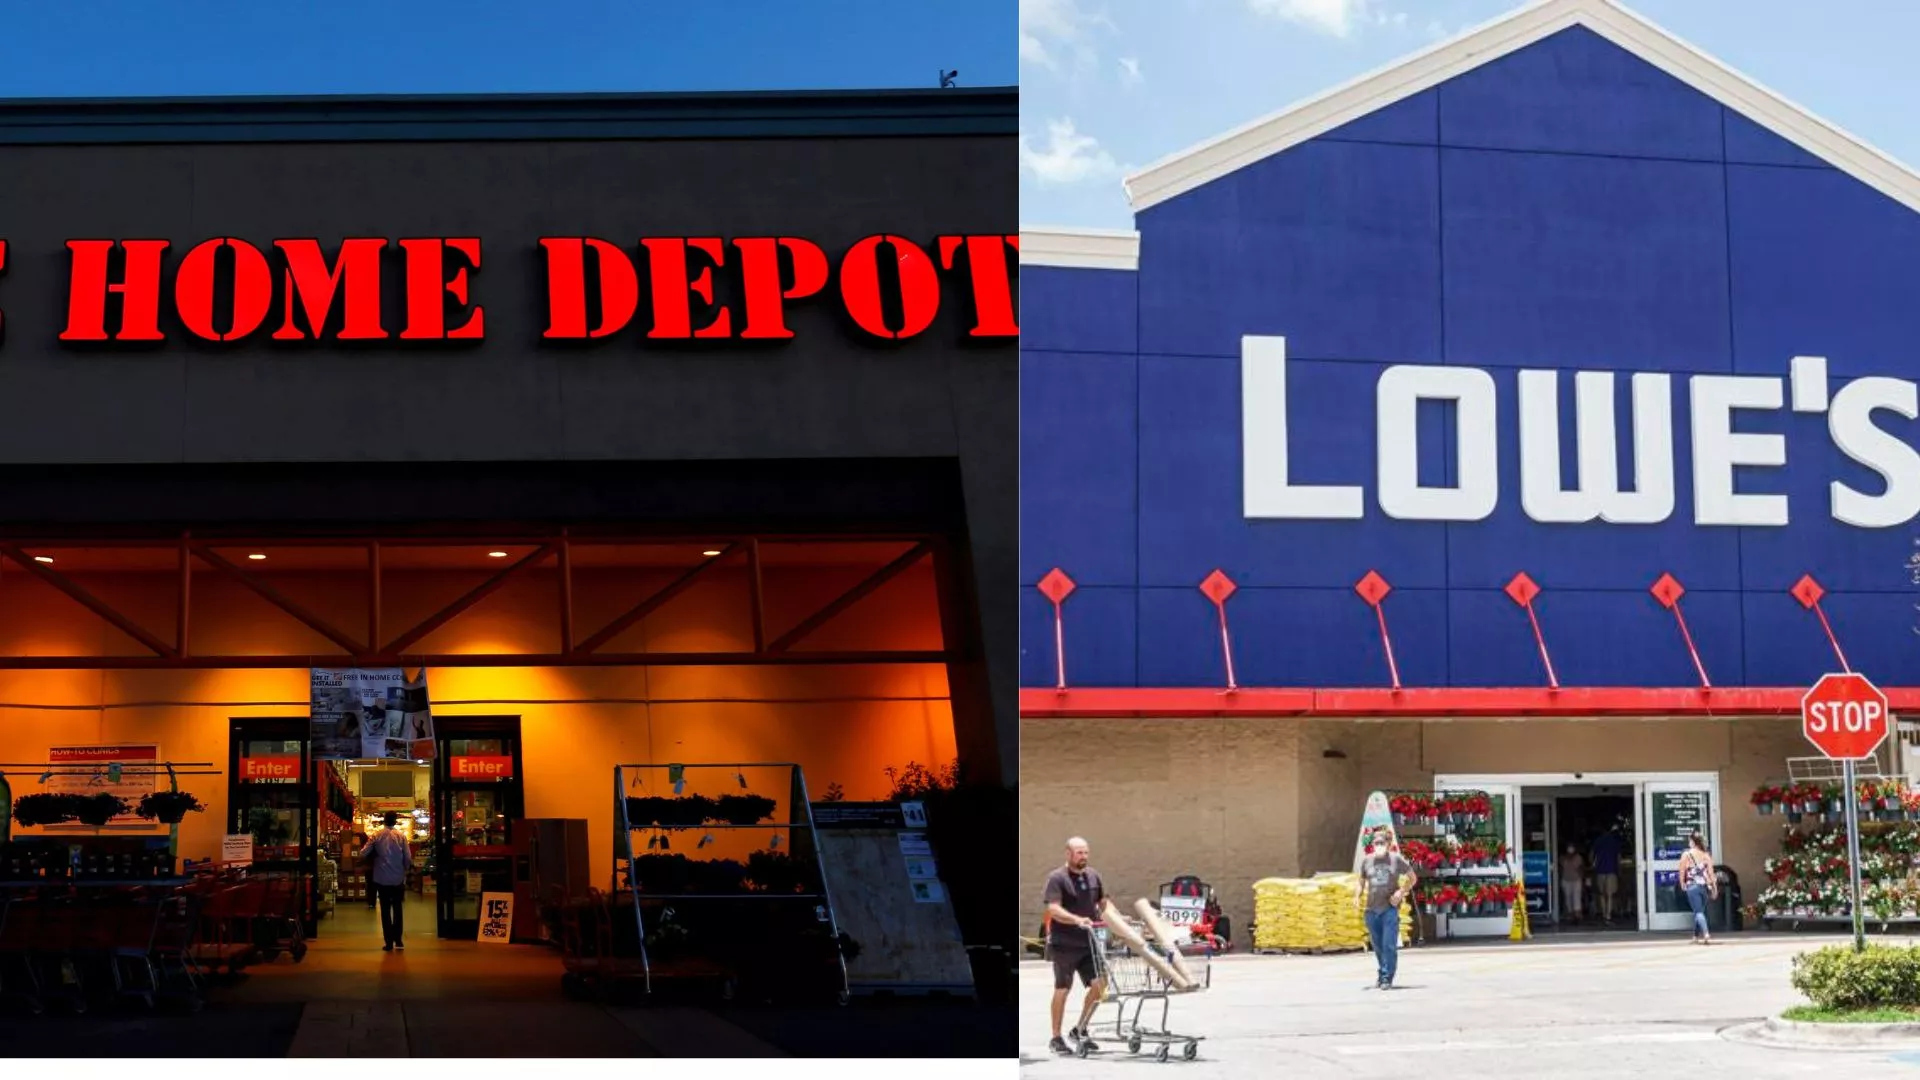 Is Home Depot and Lowe's Owned by the Same Company?